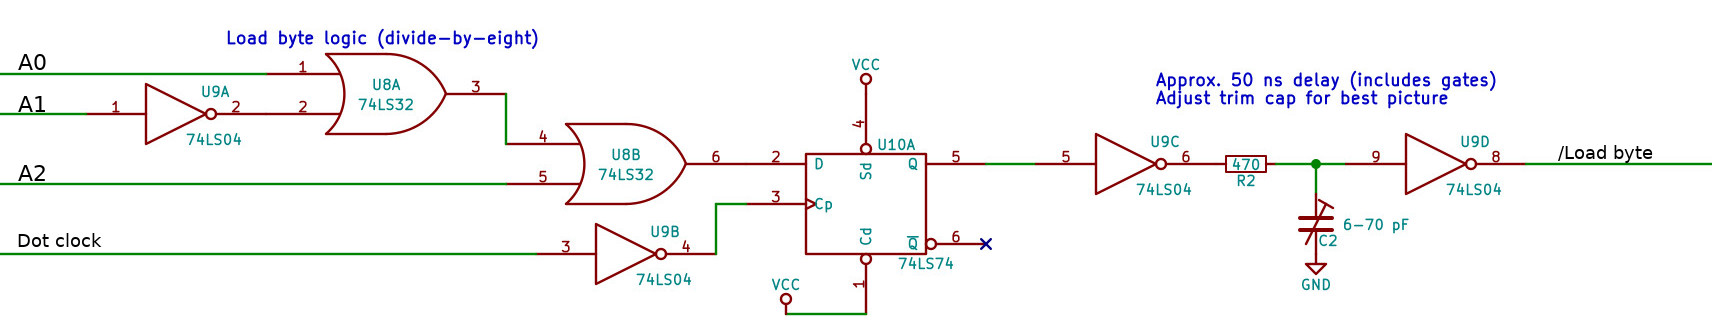 schematic of the load byte circuit